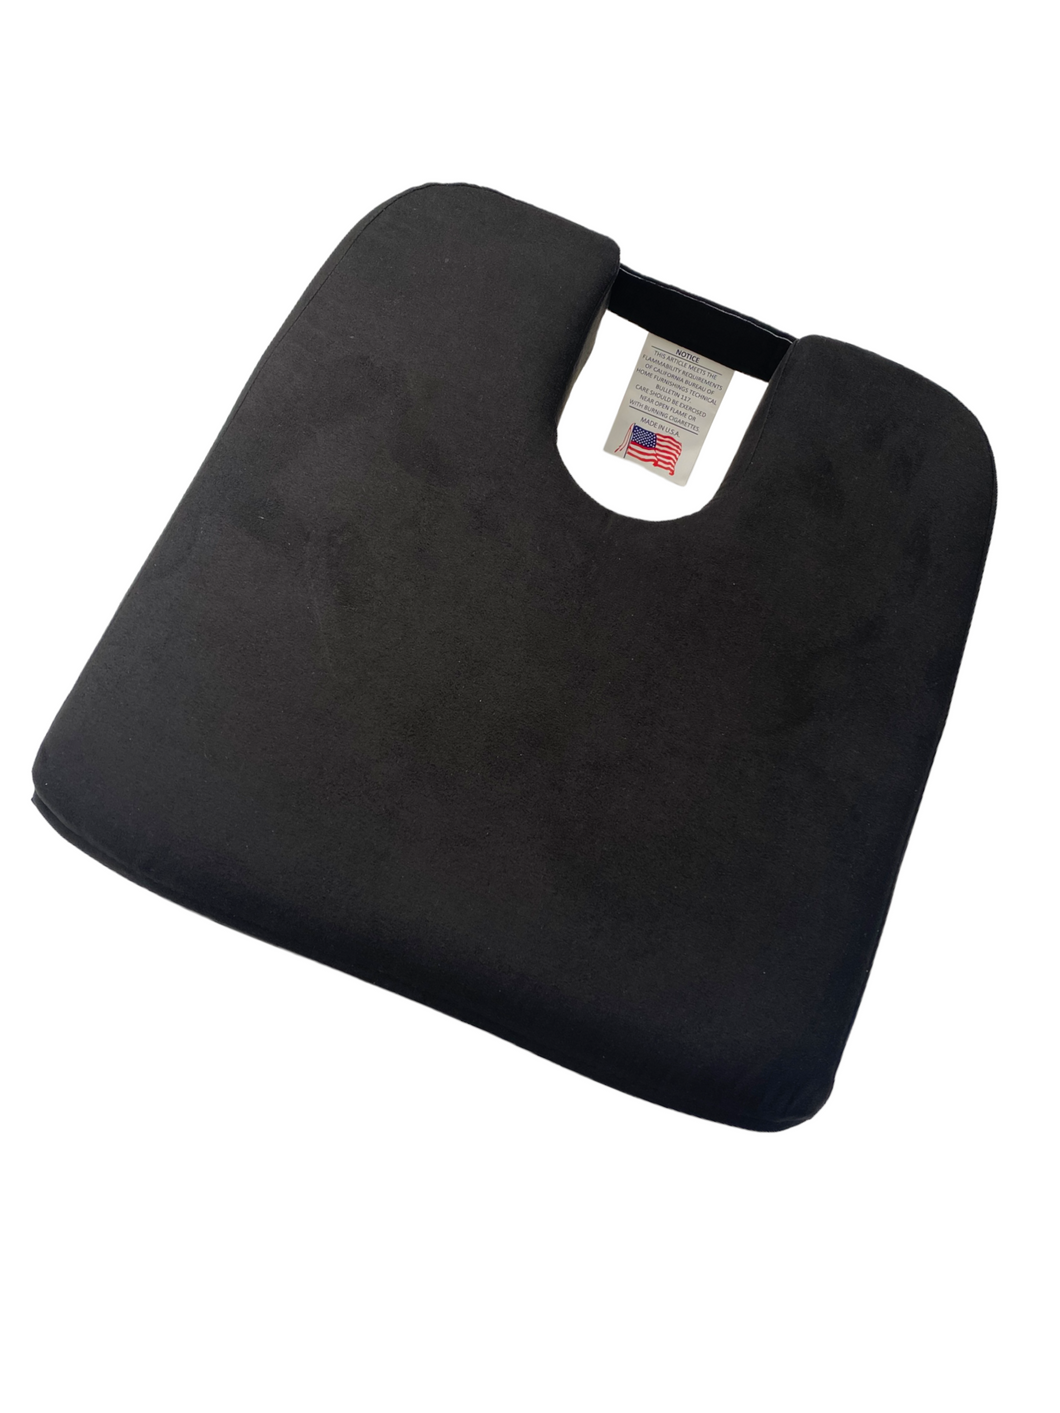 Compact Car Cush is a seat cushion in extra firm foam for users who weigh 200 lbs or more, measures 13